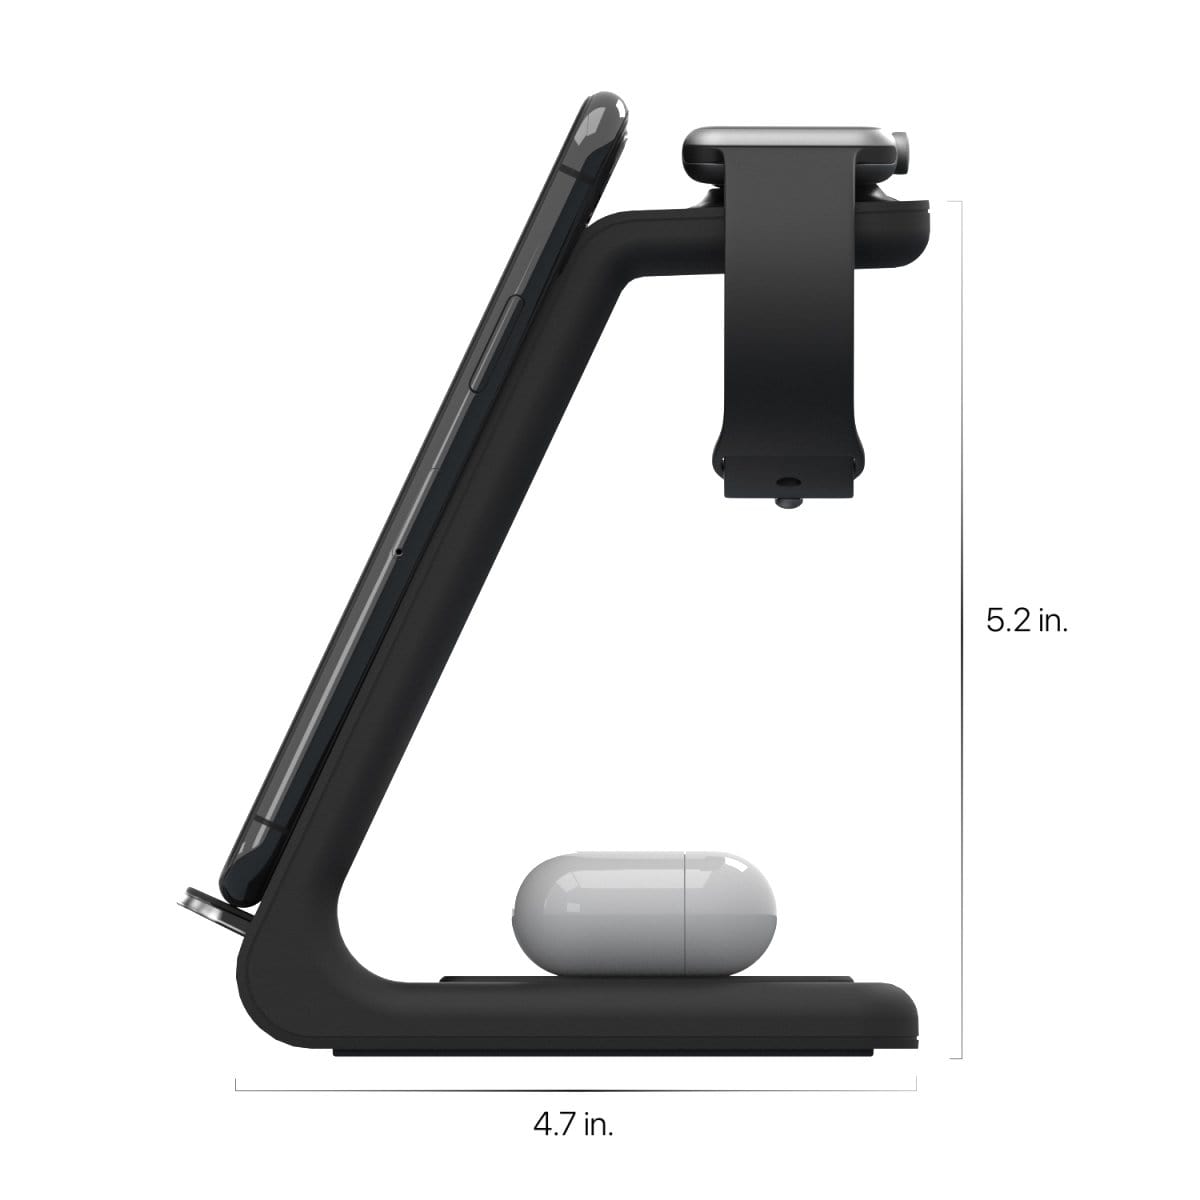 QUEZQA X12 Wireless Charging Stand (SKU: IZ-13A3-H2GF) by Quezqa